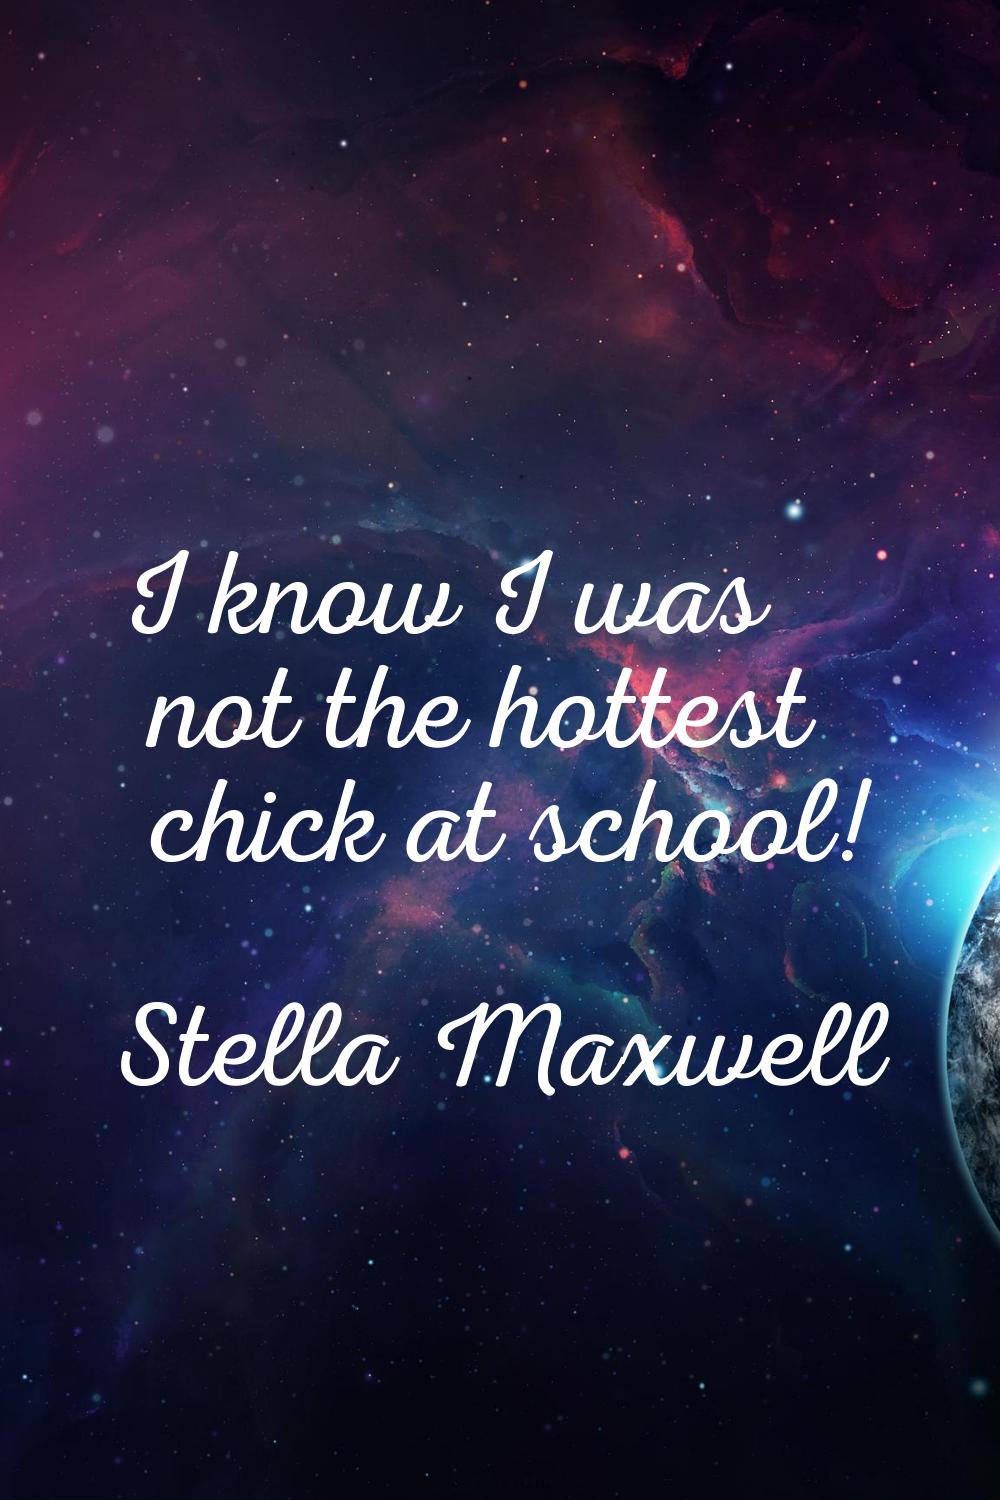 I know I was not the hottest chick at school!